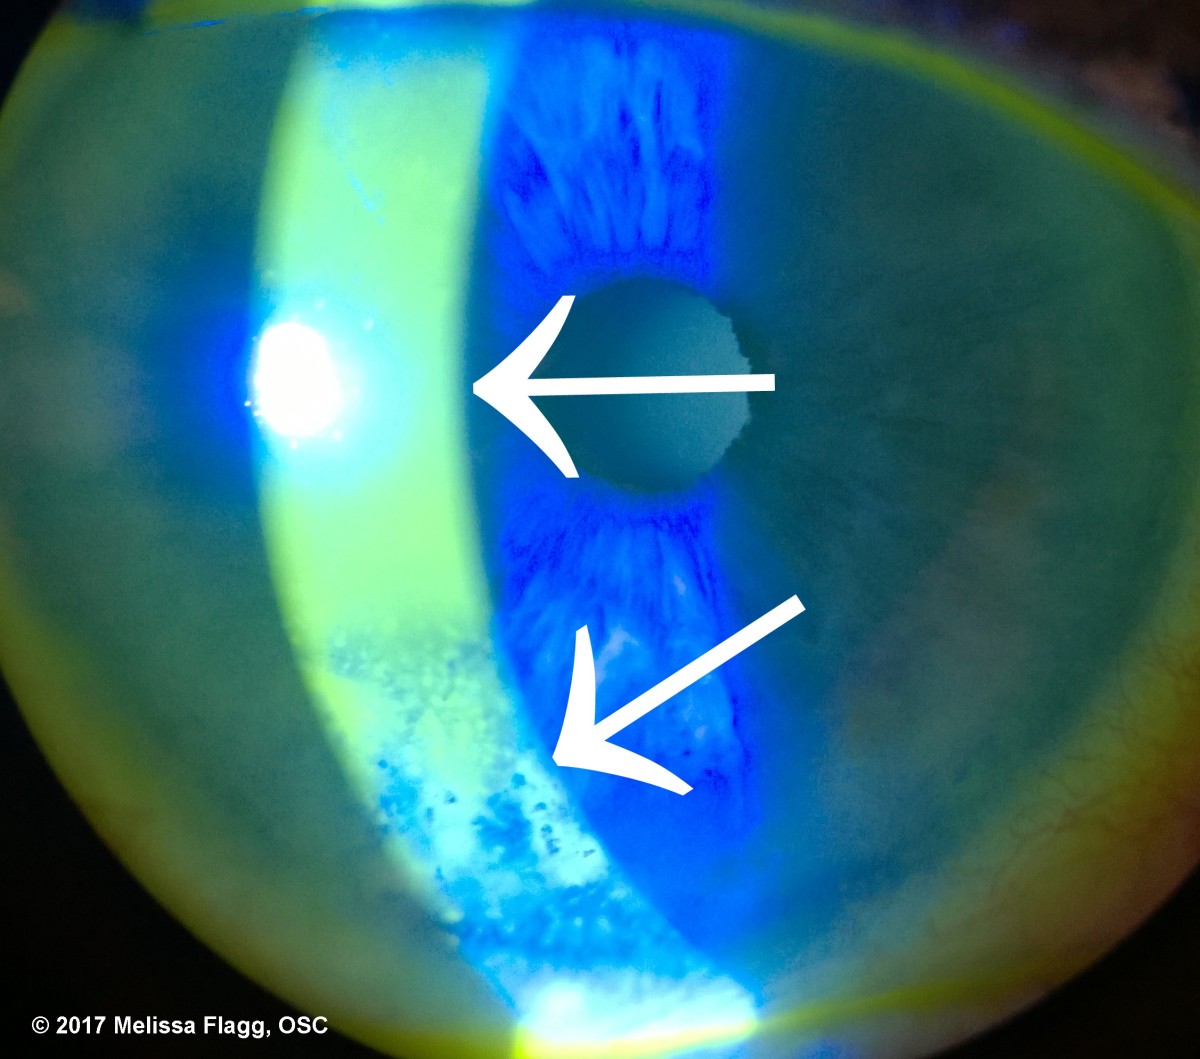 The yellow stain of fluorescein shows the health of the tear film. The top arrow points to what the tear film should look like. The bottom arrow points to what the tear film looks like in an eye that is dry. 